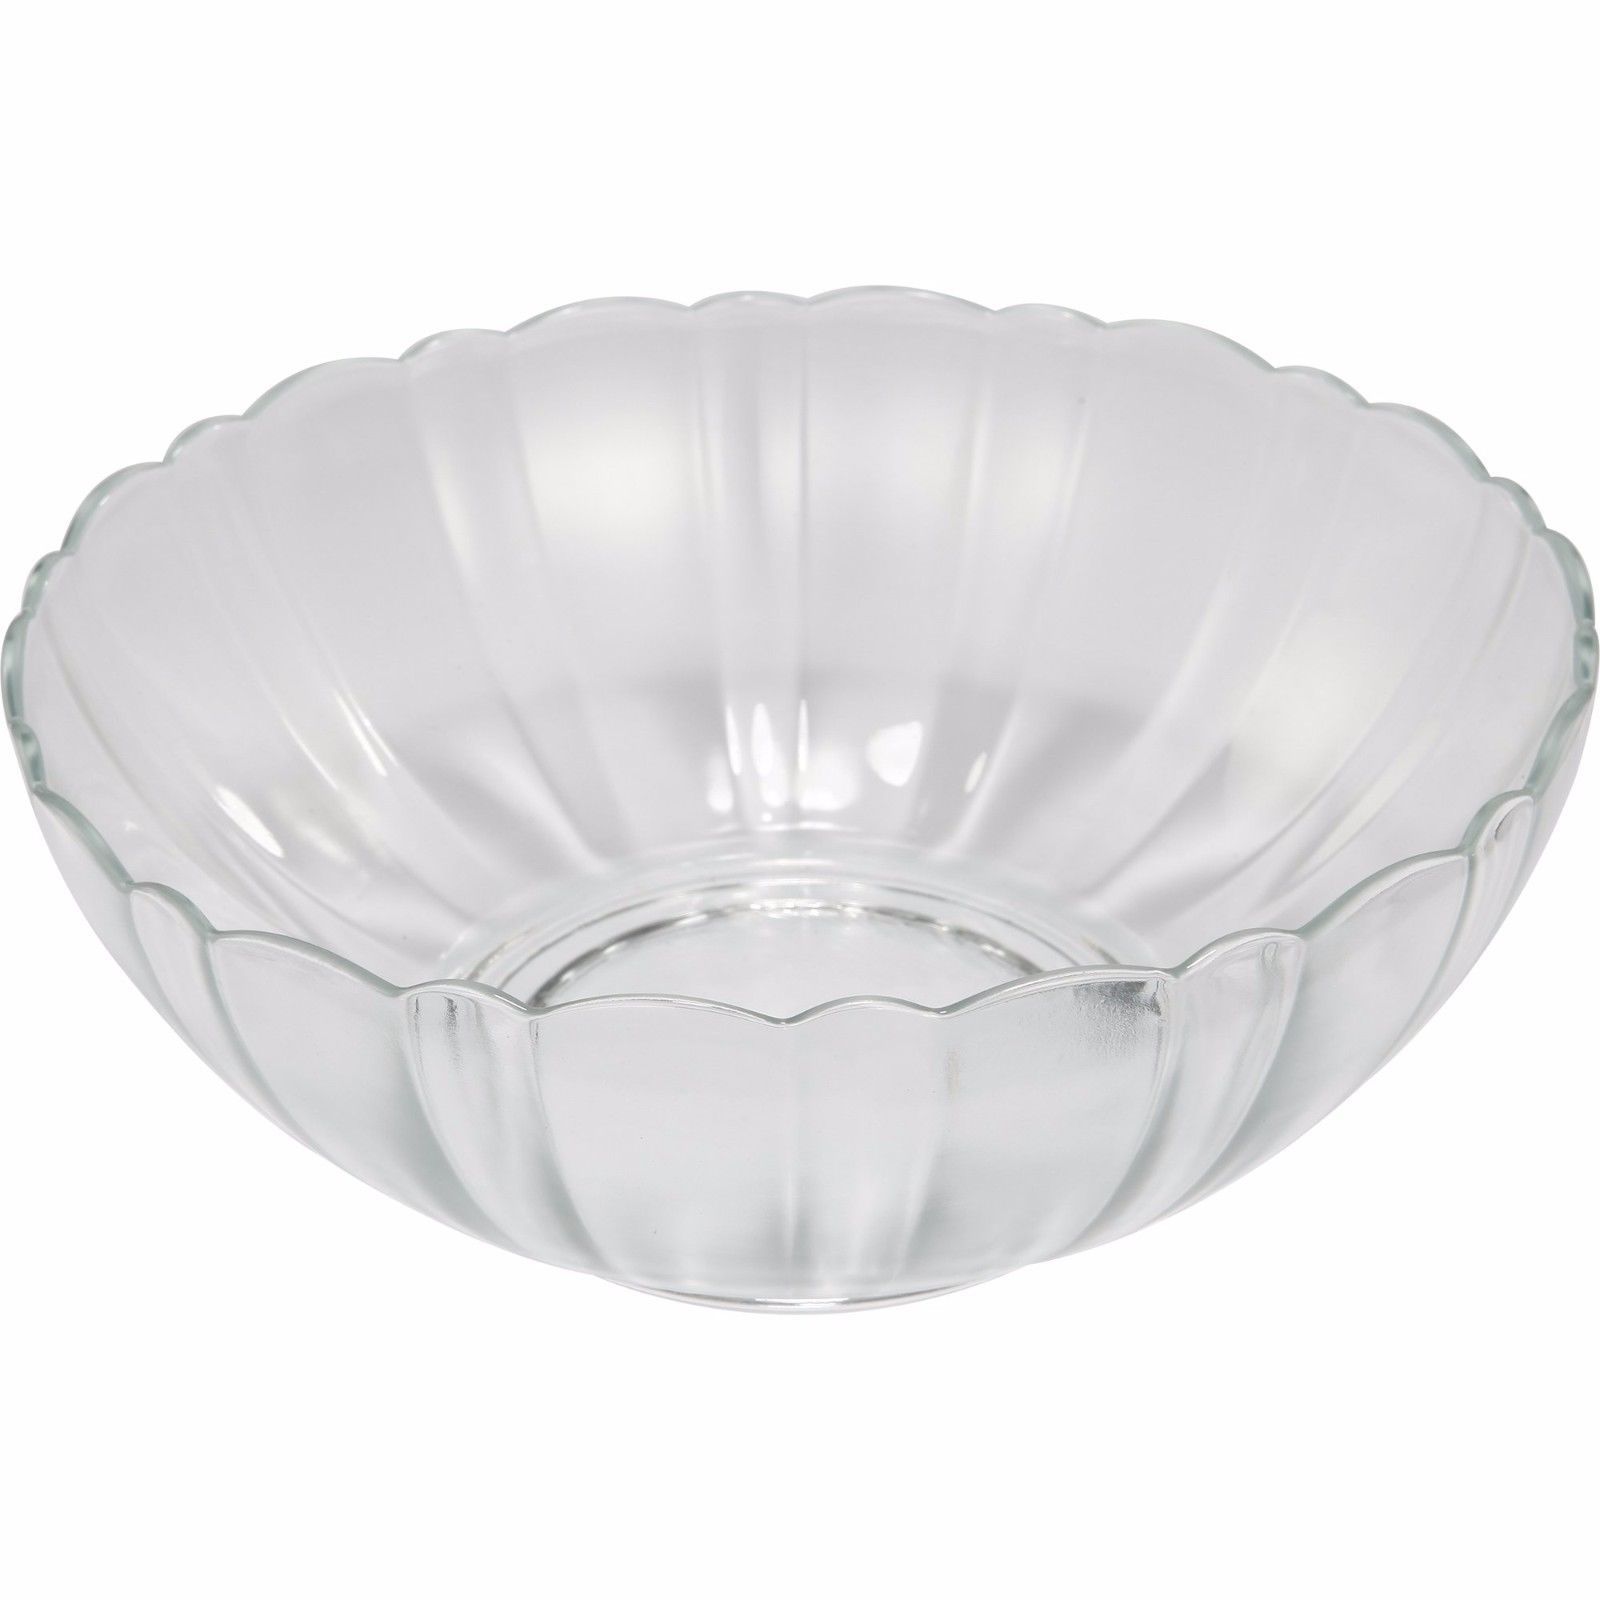 Glass Serving Bowl Clear Party Entertain Decorative Abstract Round Centerpiece Bowls